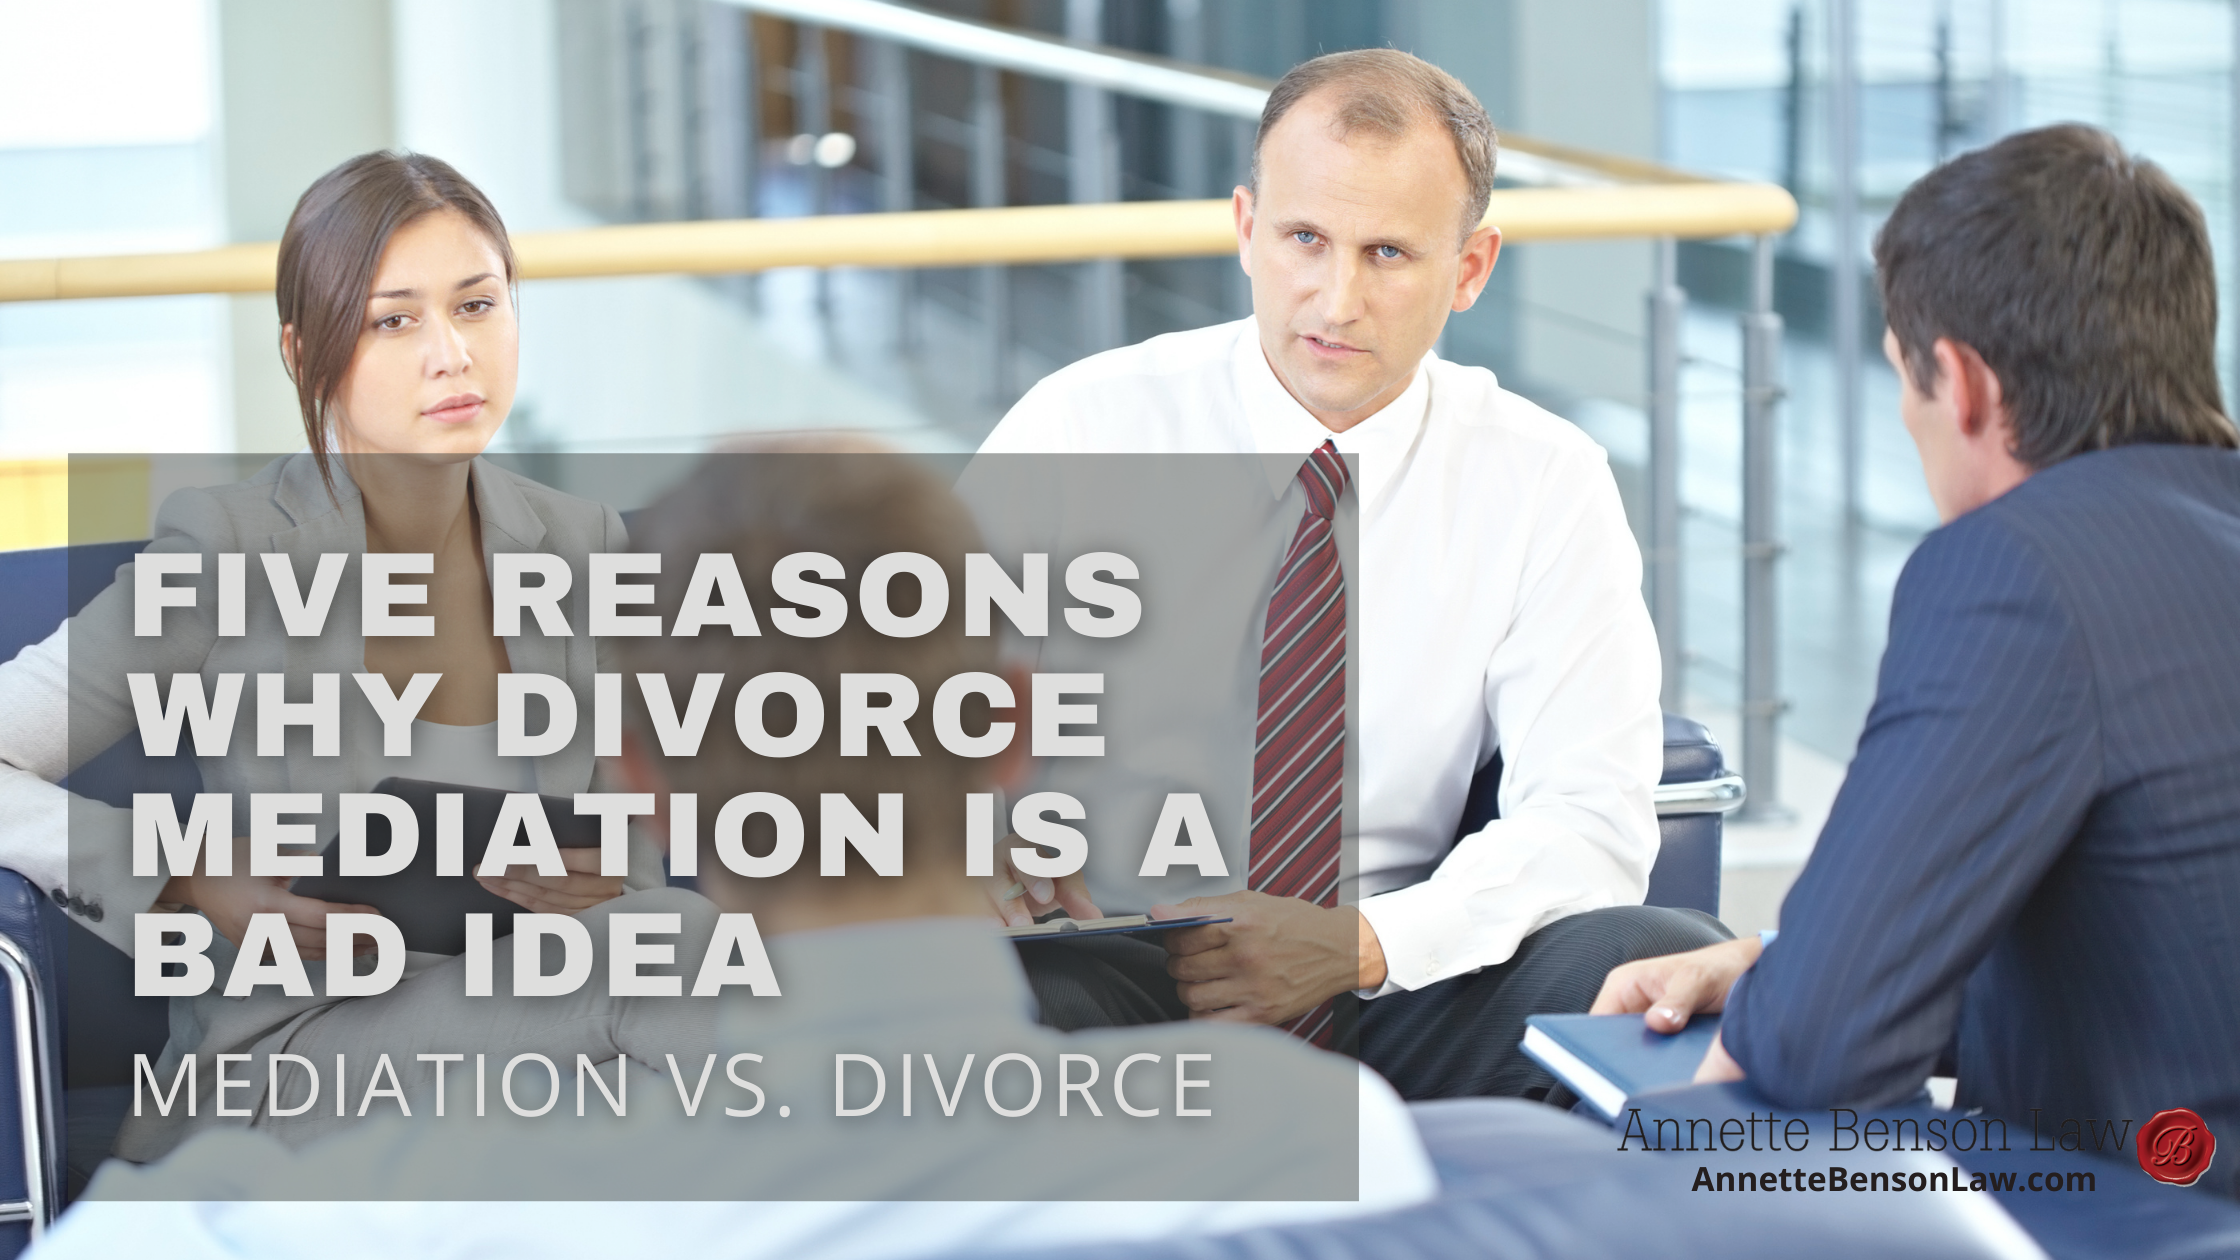 Five reasons why divorce mediation is a bad idea